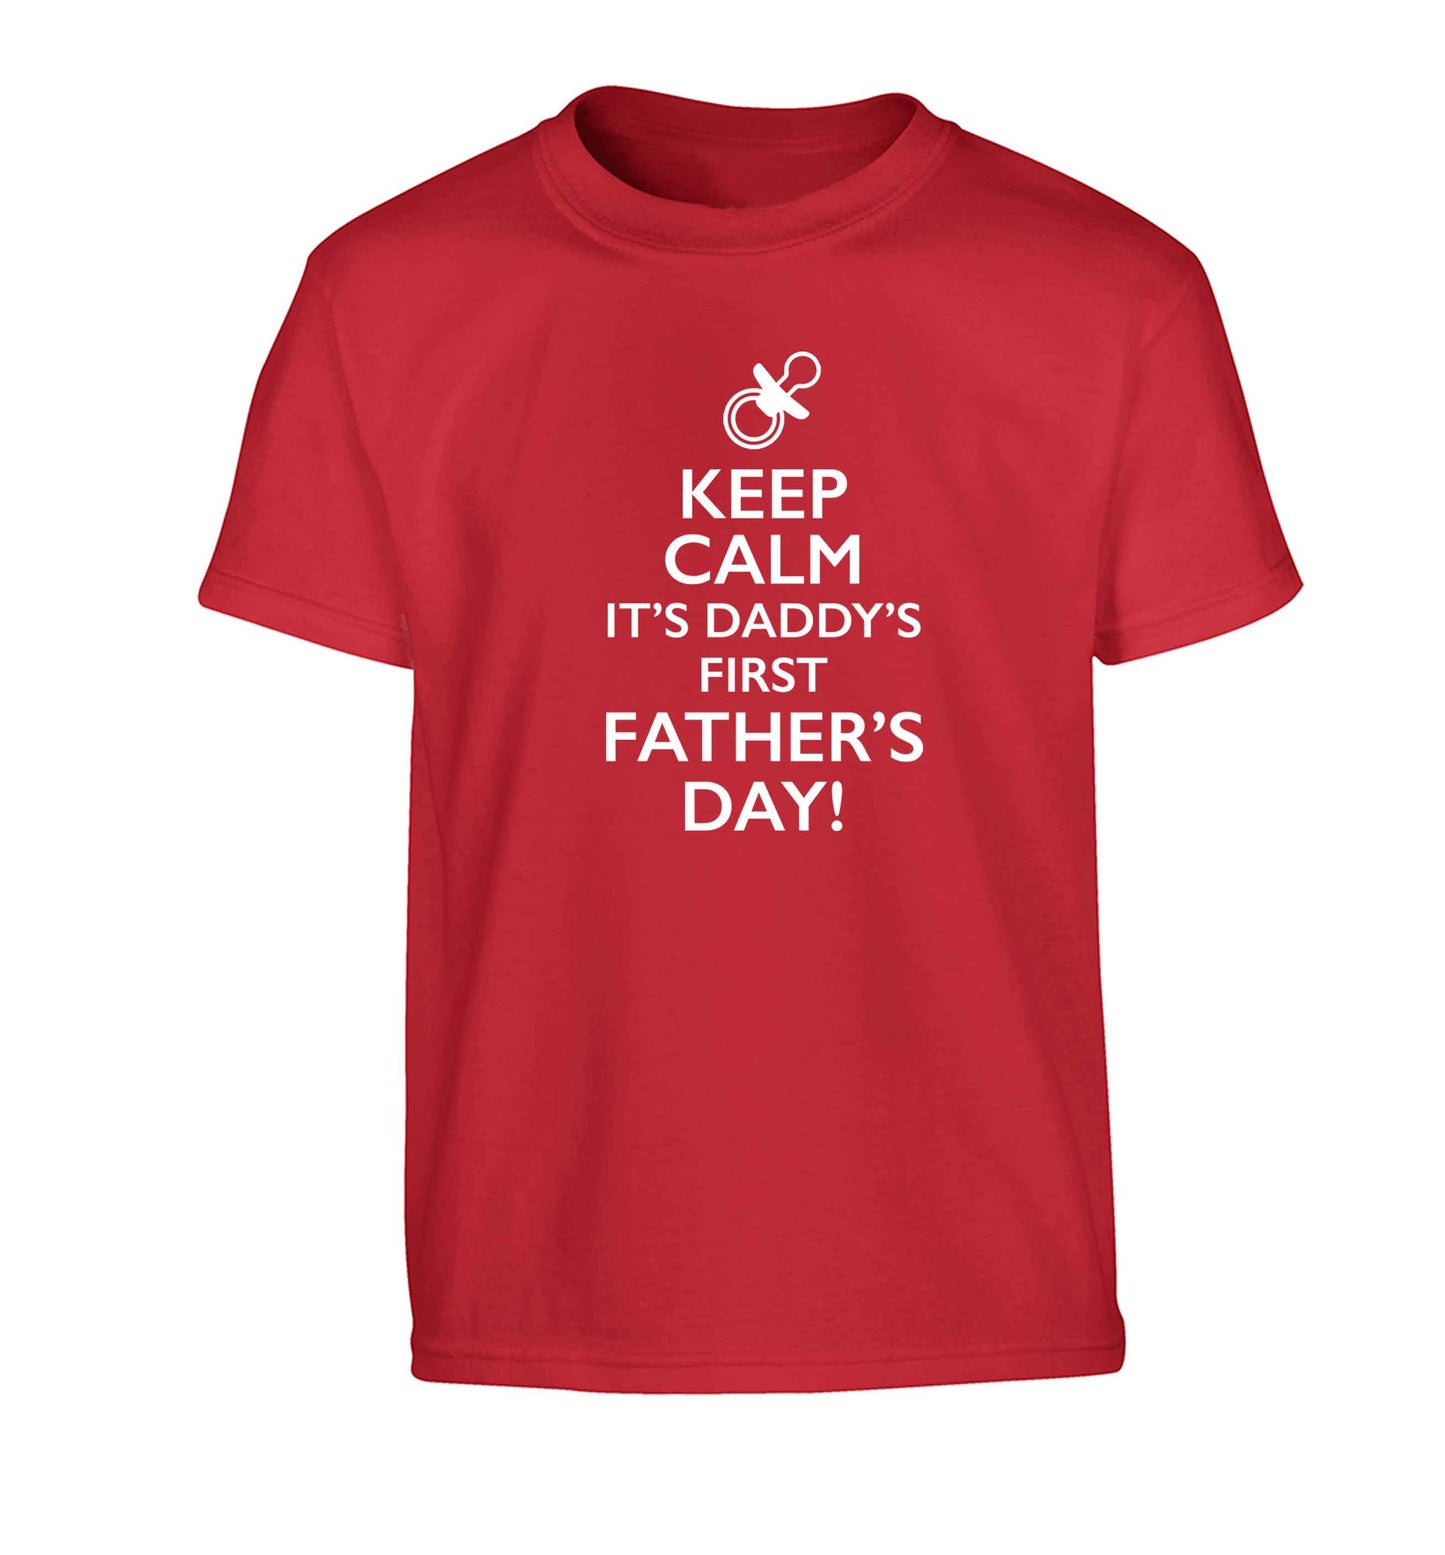 Keep calm it's daddys first father's day Children's red Tshirt 12-13 Years